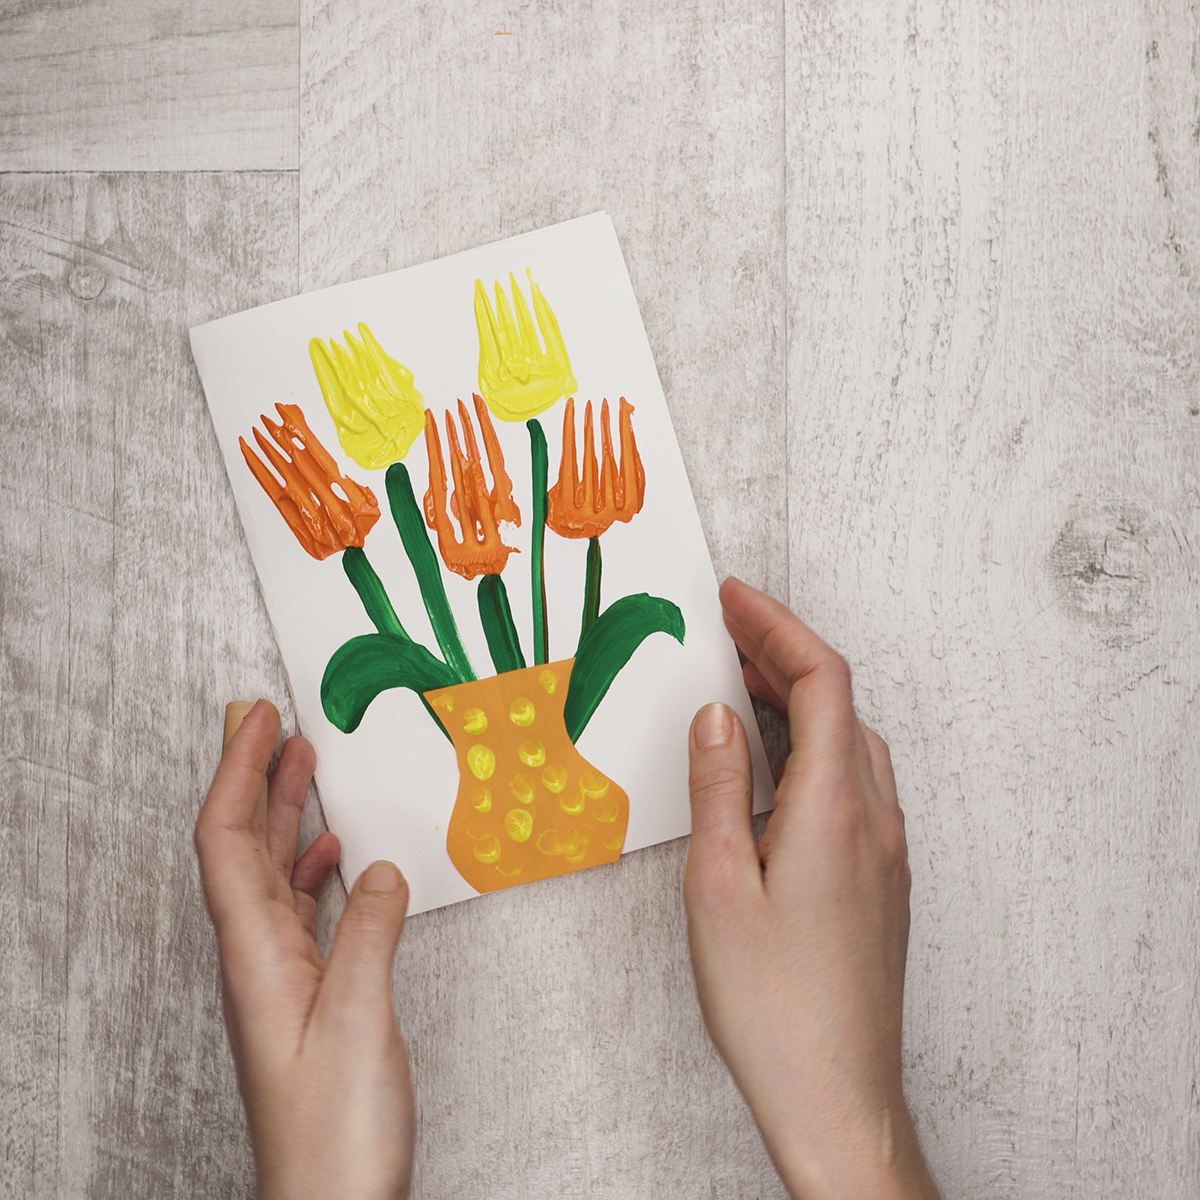 Make the vase catchier using yellow paint and your finger – just stamp some paint on it